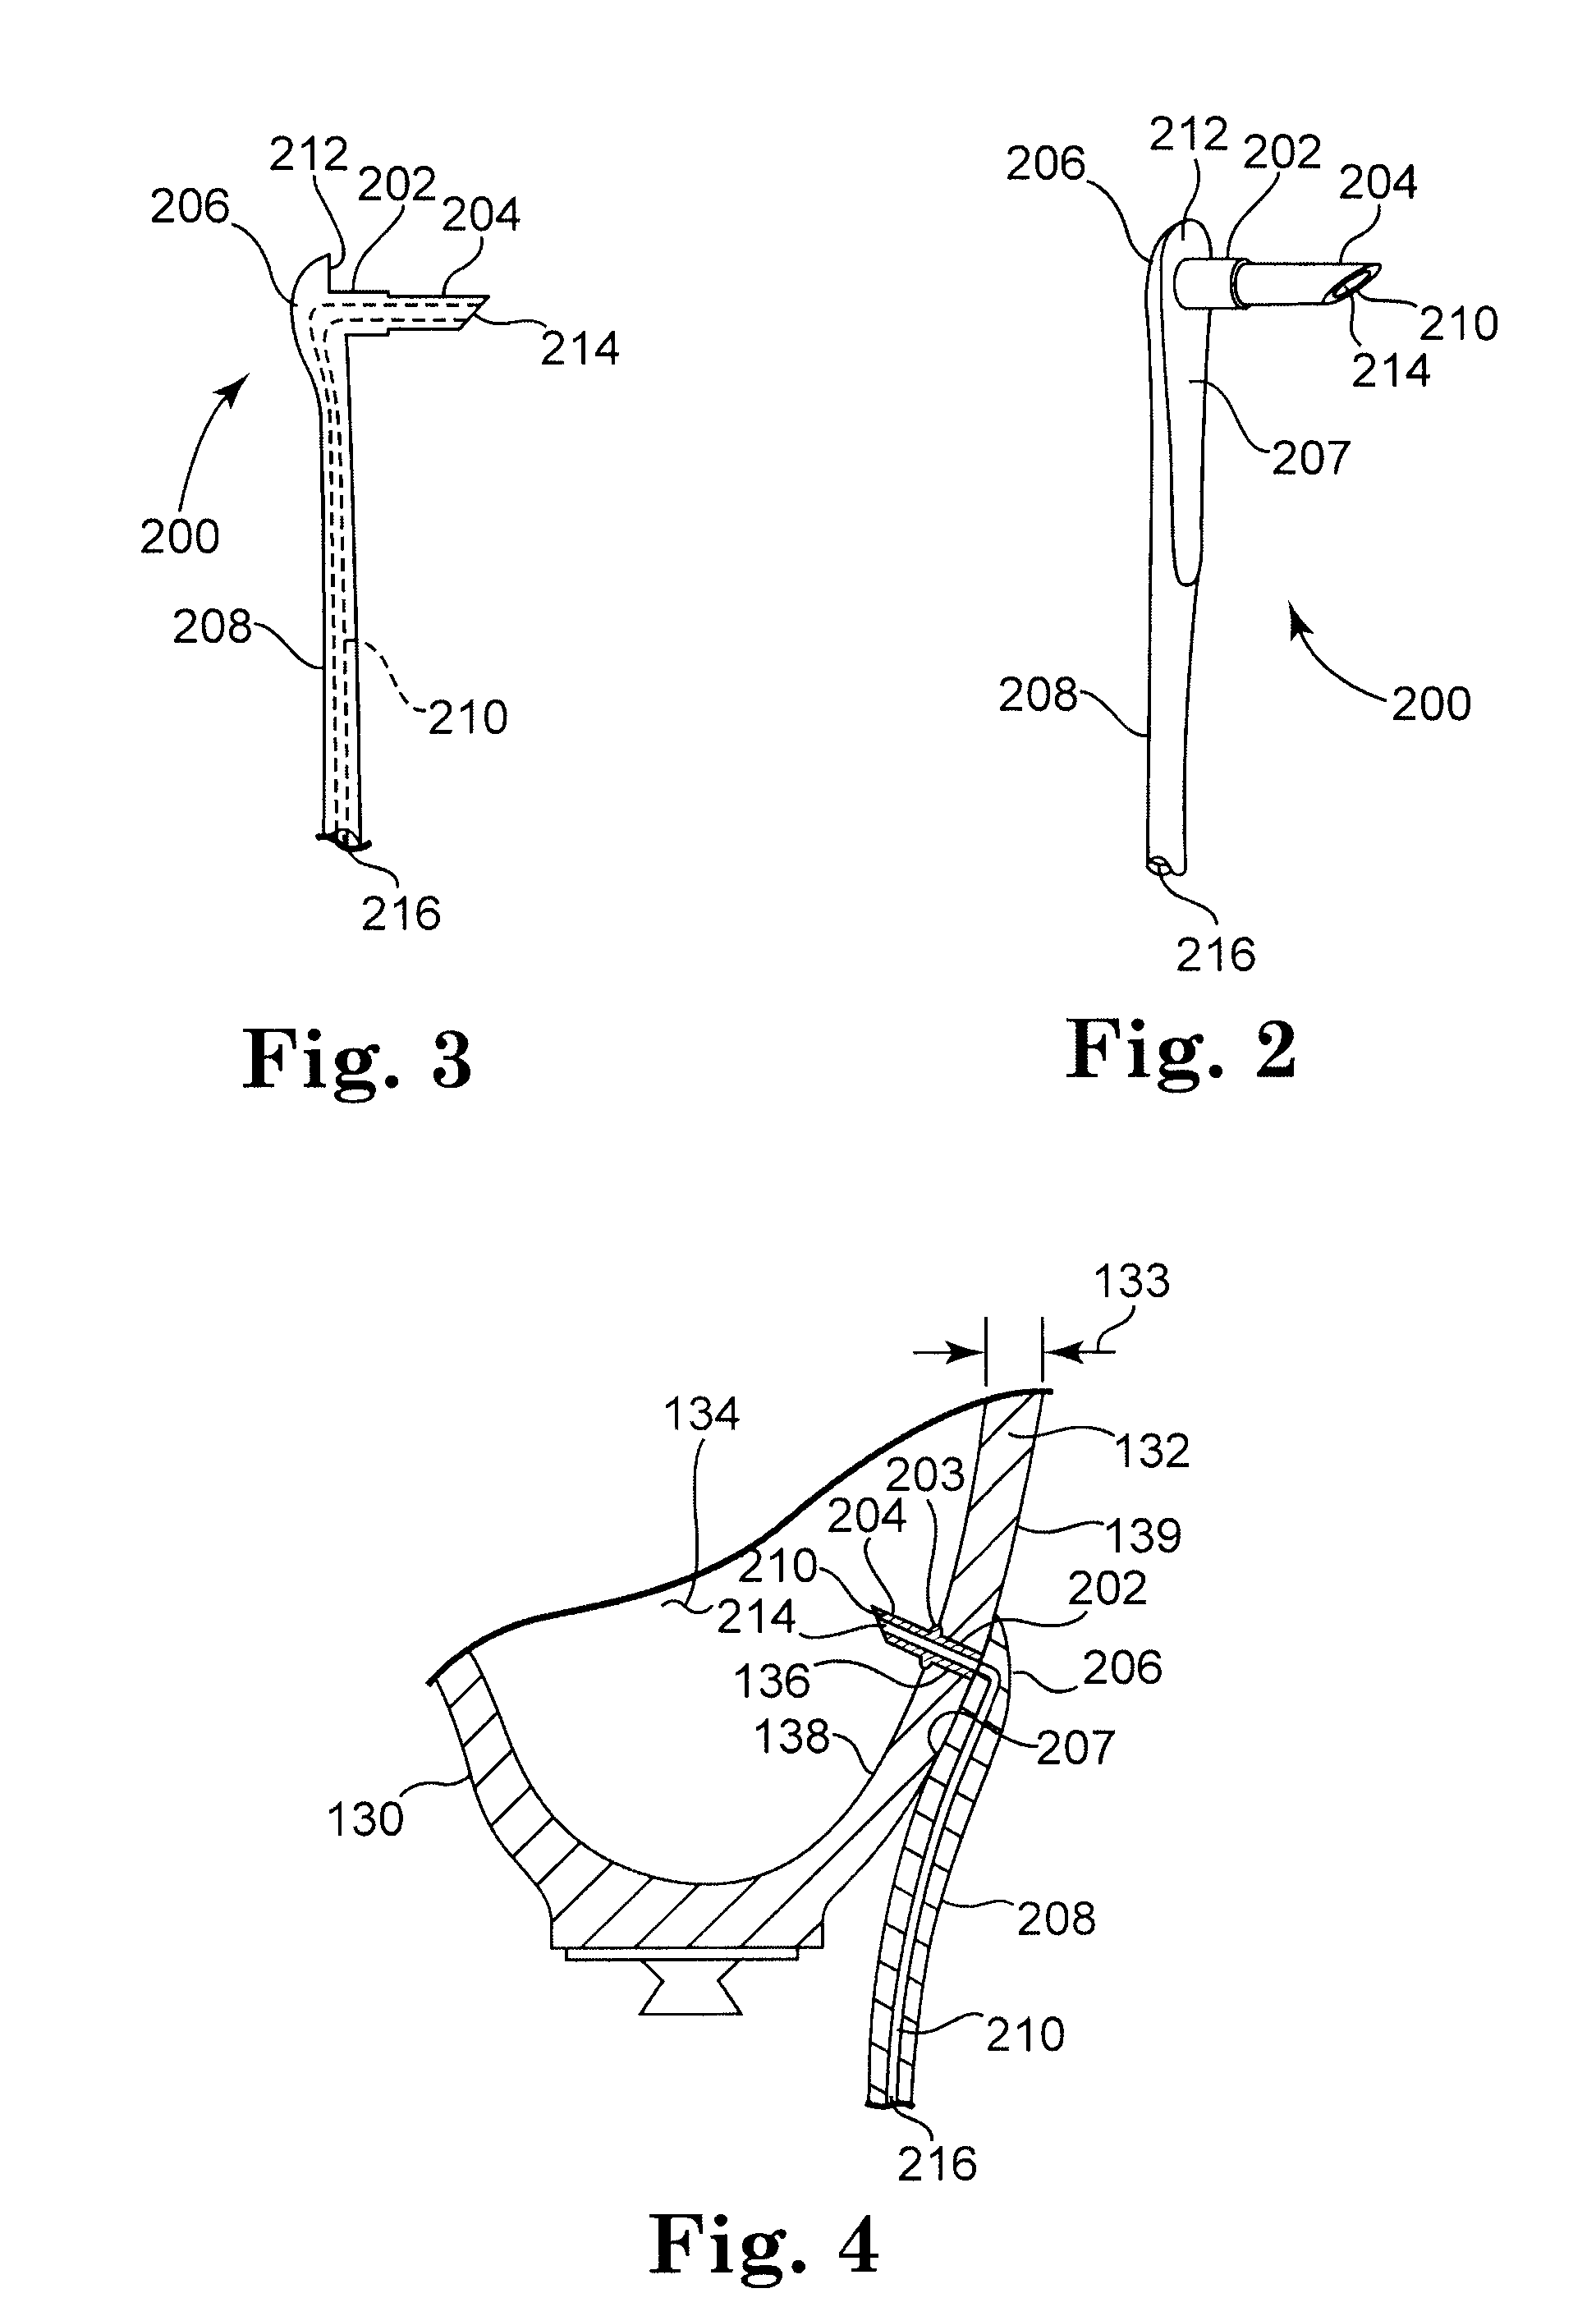 Pneumatic connections for prosthetic socket